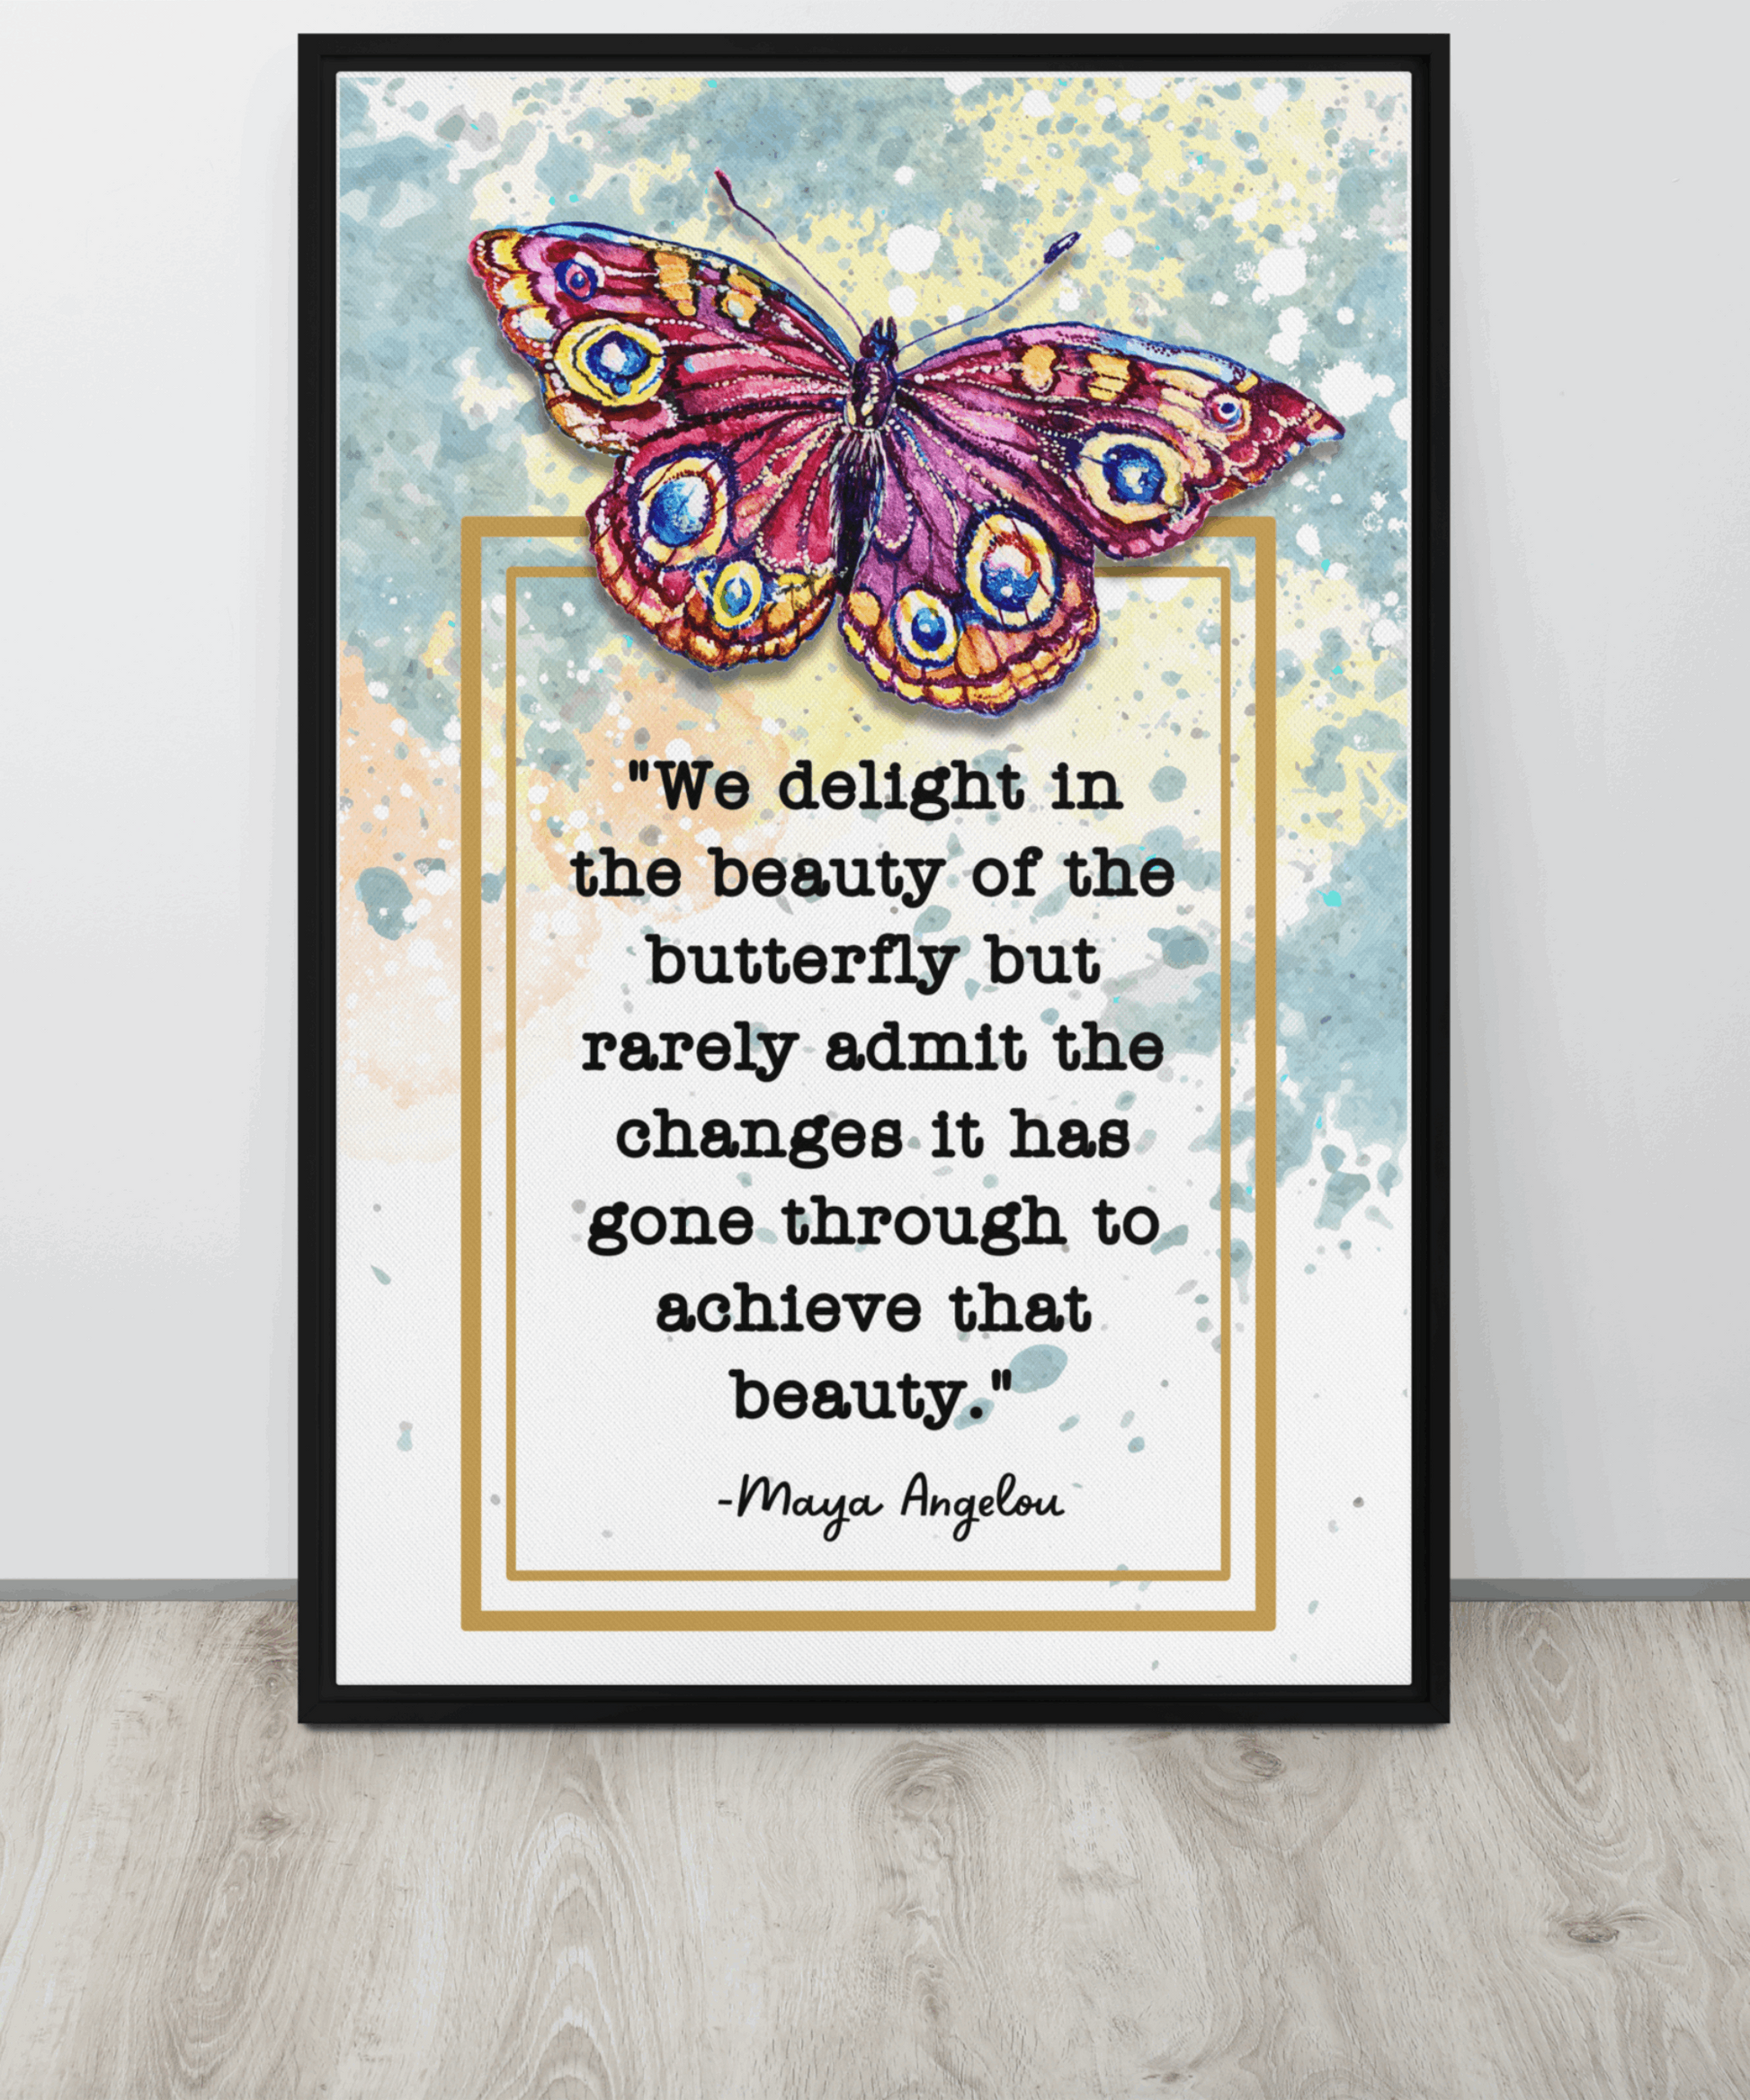 Inspirational Wall Art: Maya Angelou Butterfly Quote